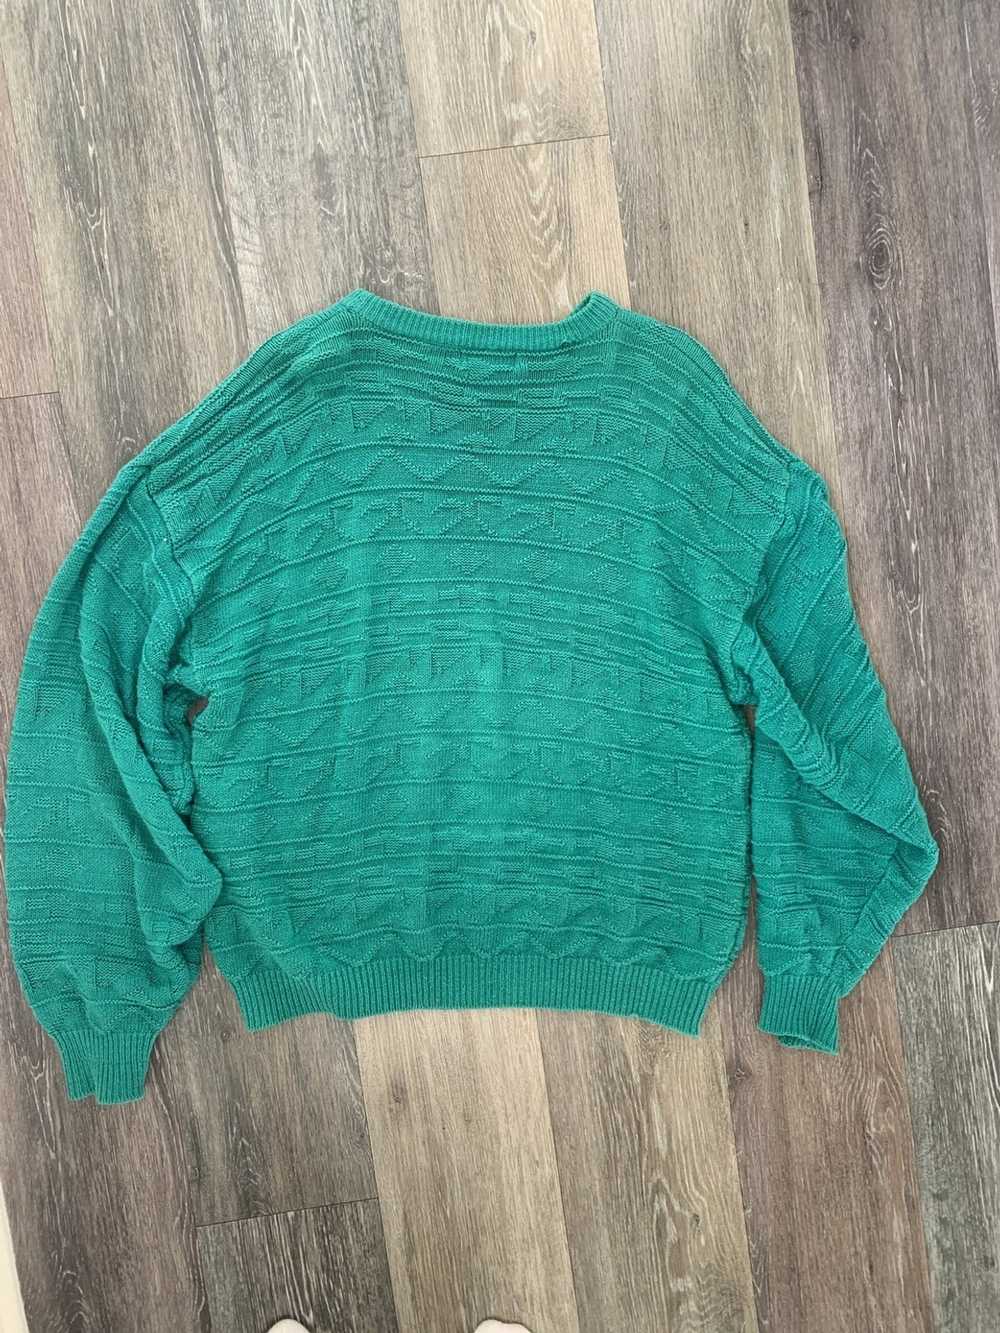 Vintage VINTAGE TURQUOISE KNITTED SWEATER - image 2